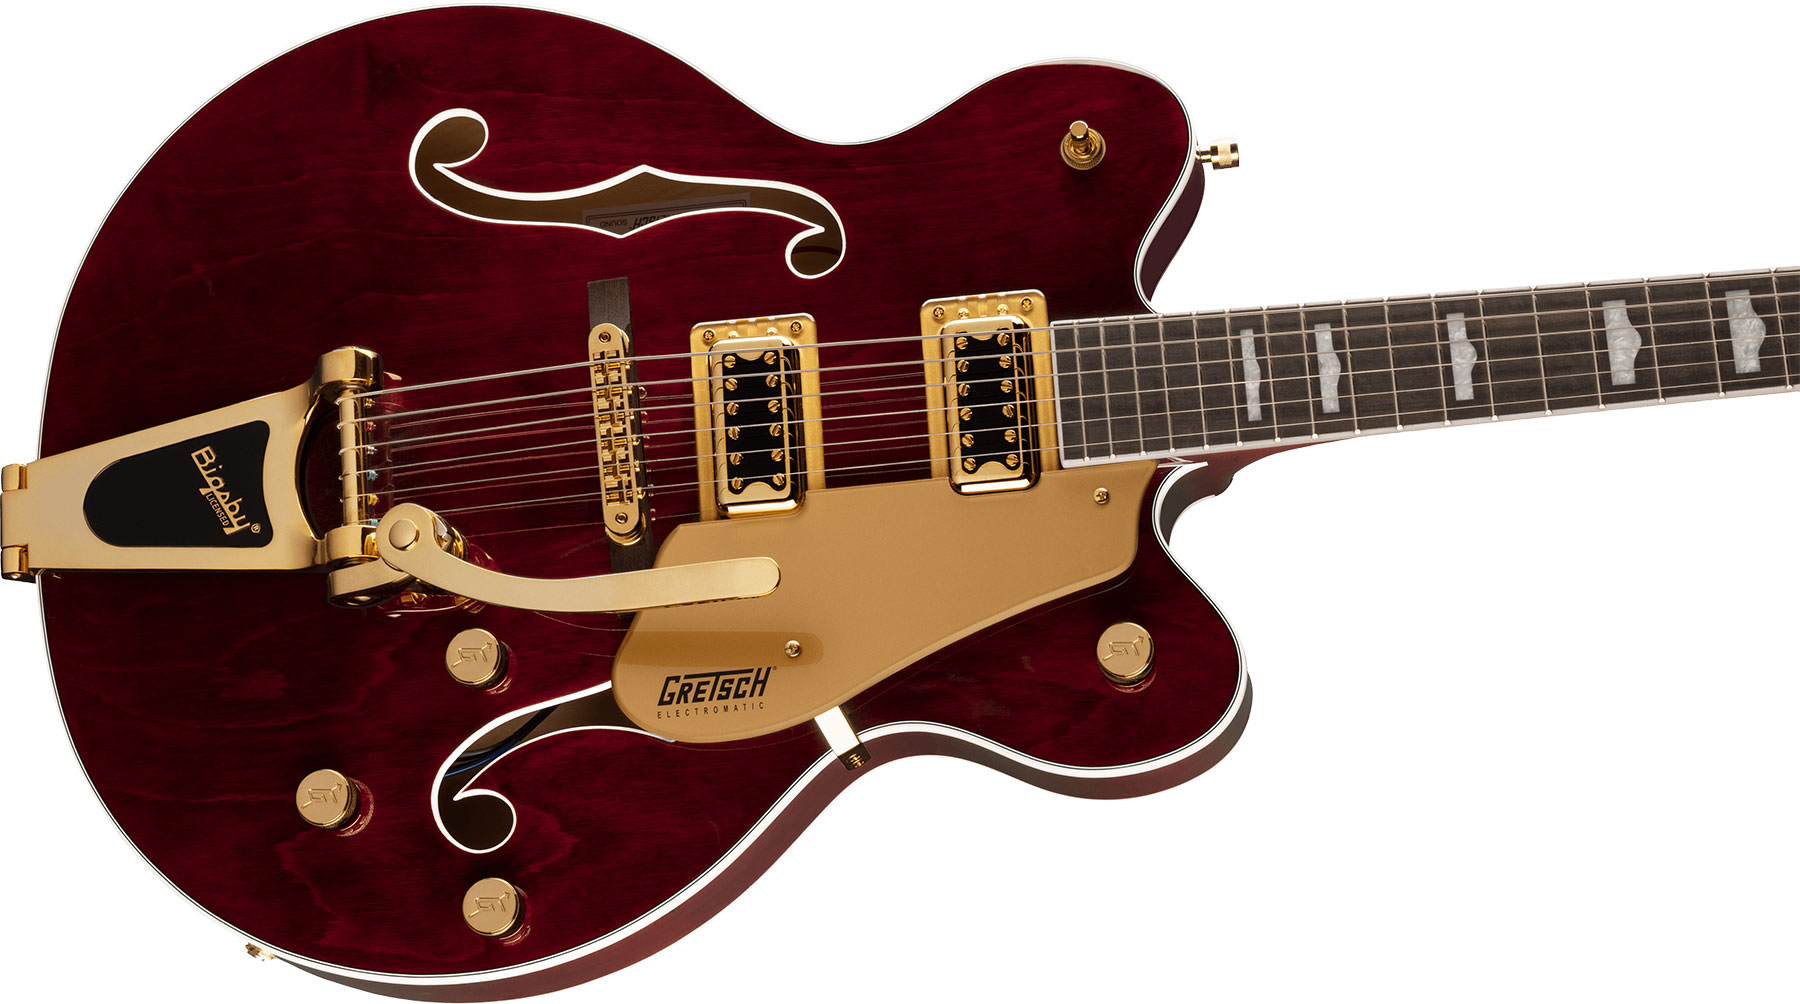 Gretsch G5422tg Electromatic Classic Hollow Body Dc Bigsby Hh Lau - Walnut Stain - Semi-hollow electric guitar - Variation 2